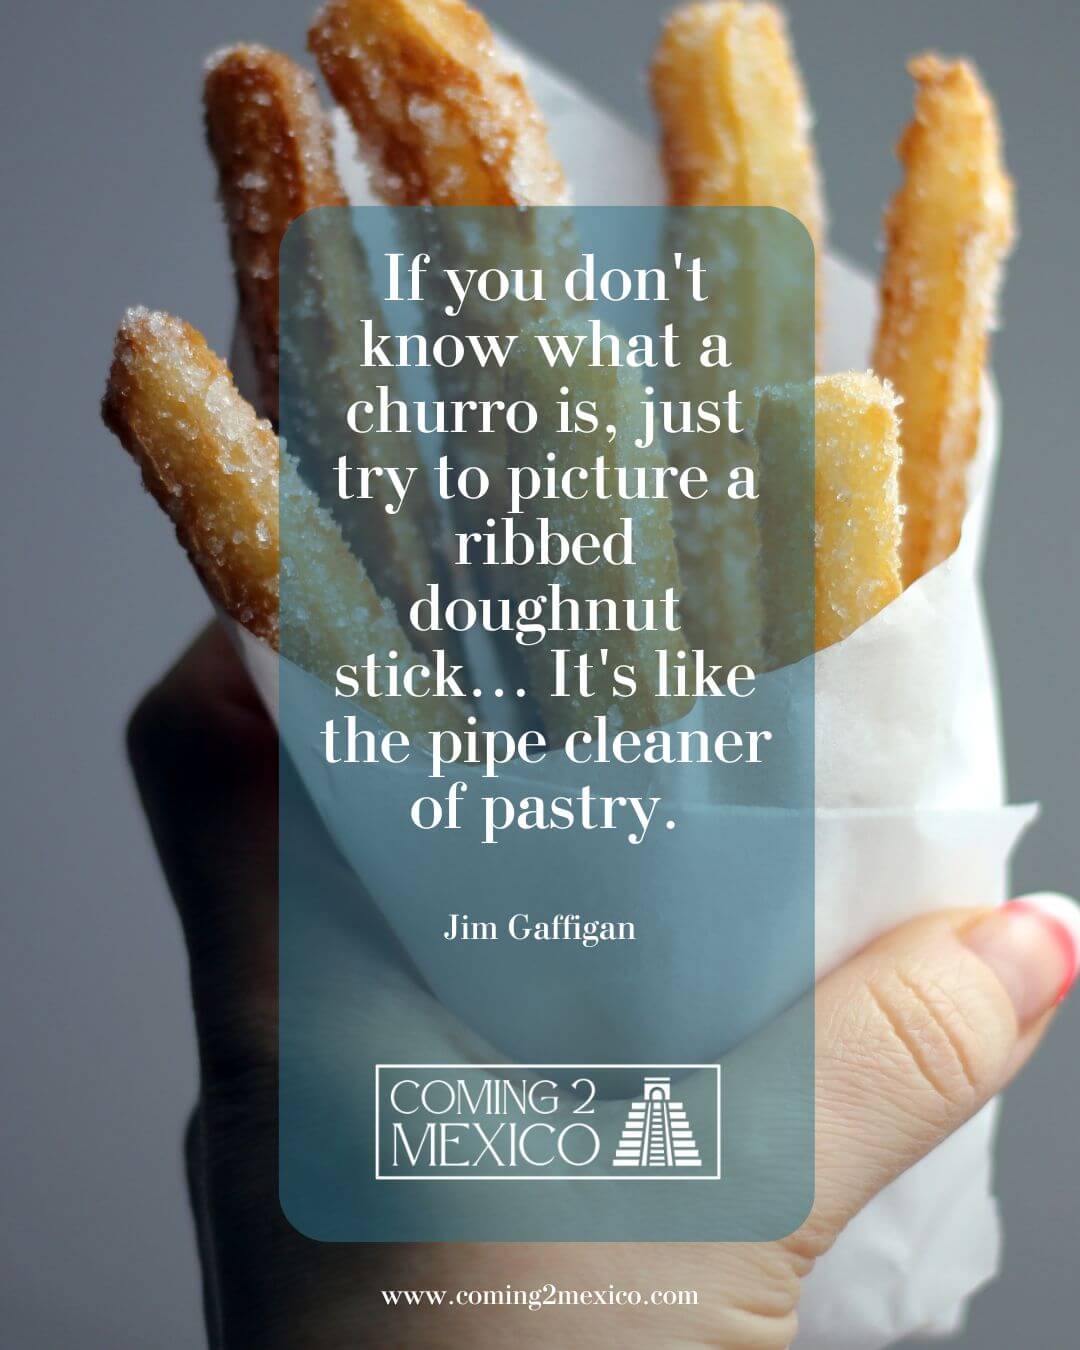 "If you don't know what a churro is, just try to picture a ribbed doughnut stick... It's like the pipe cleaner of pastry." - Jim Gaffigan